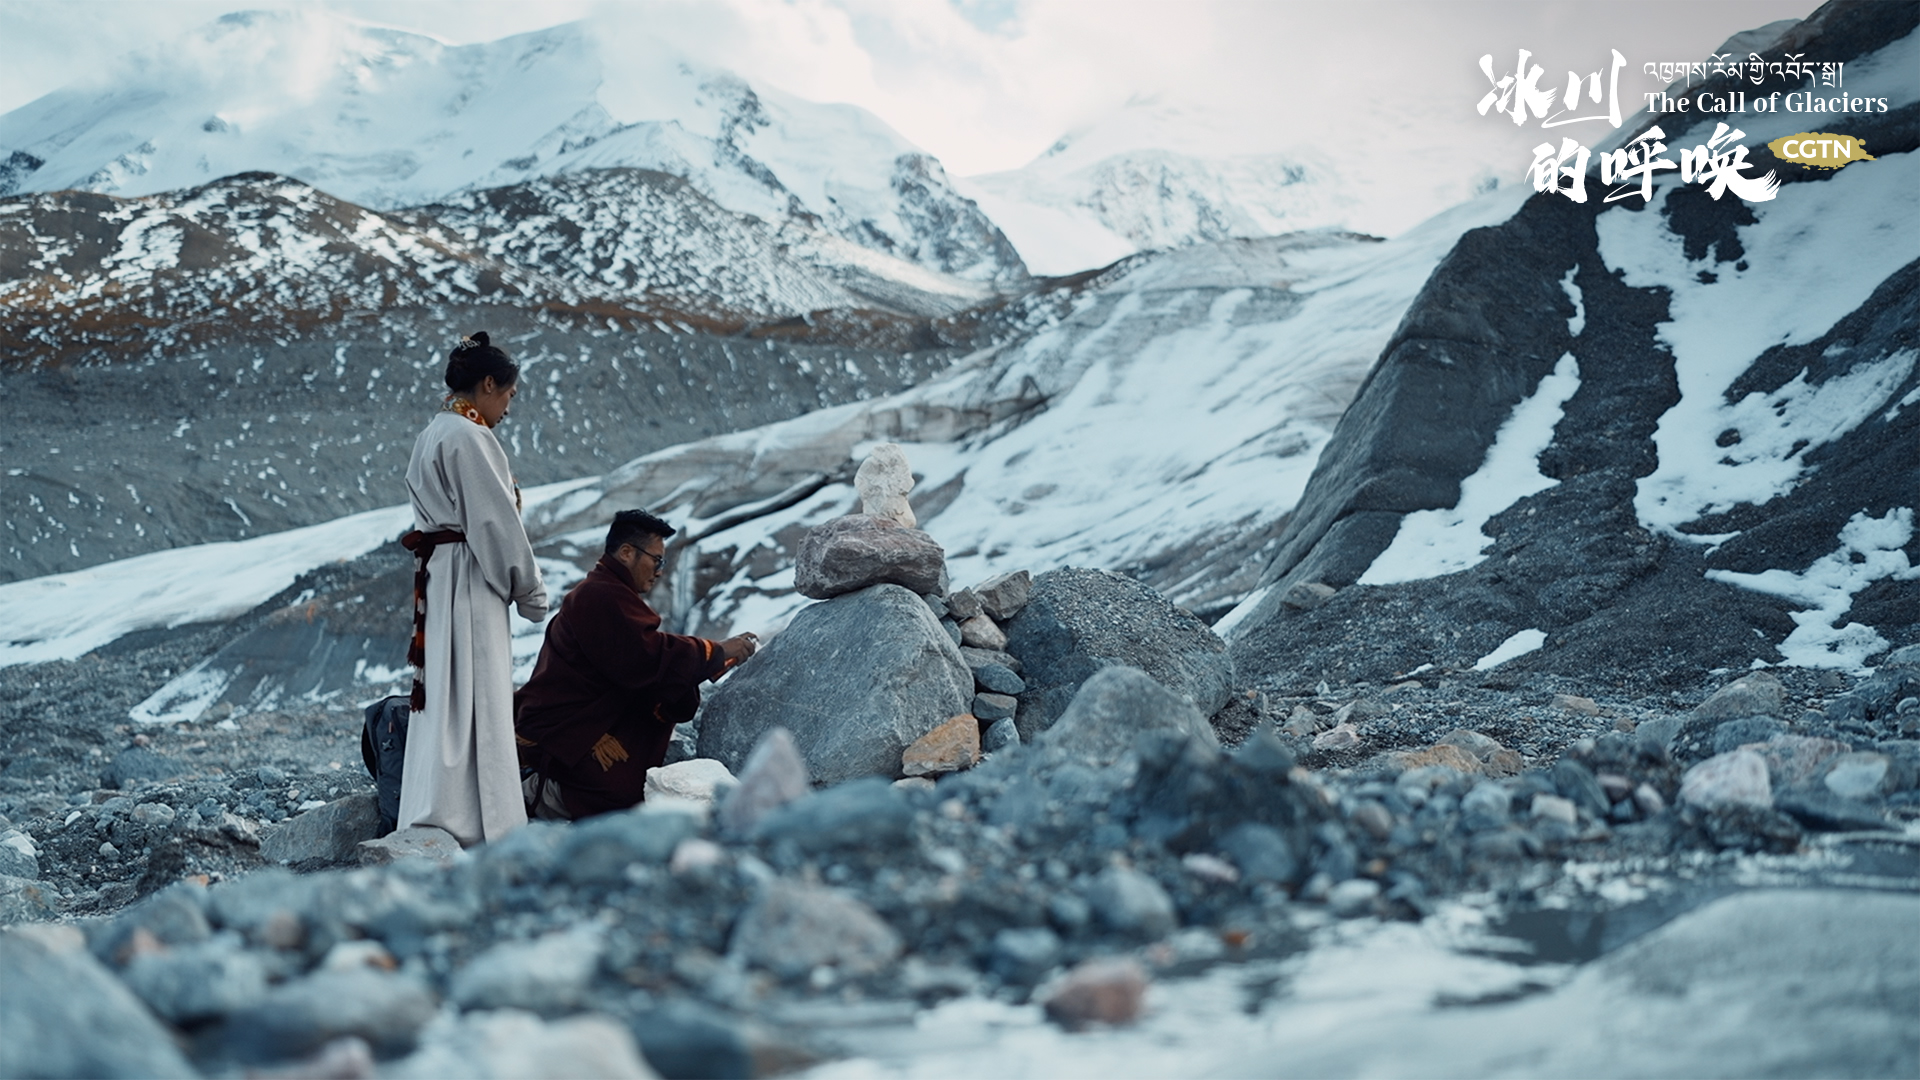 Palyang's Story beyond CGTN documentary film 'The Call of Glaciers'